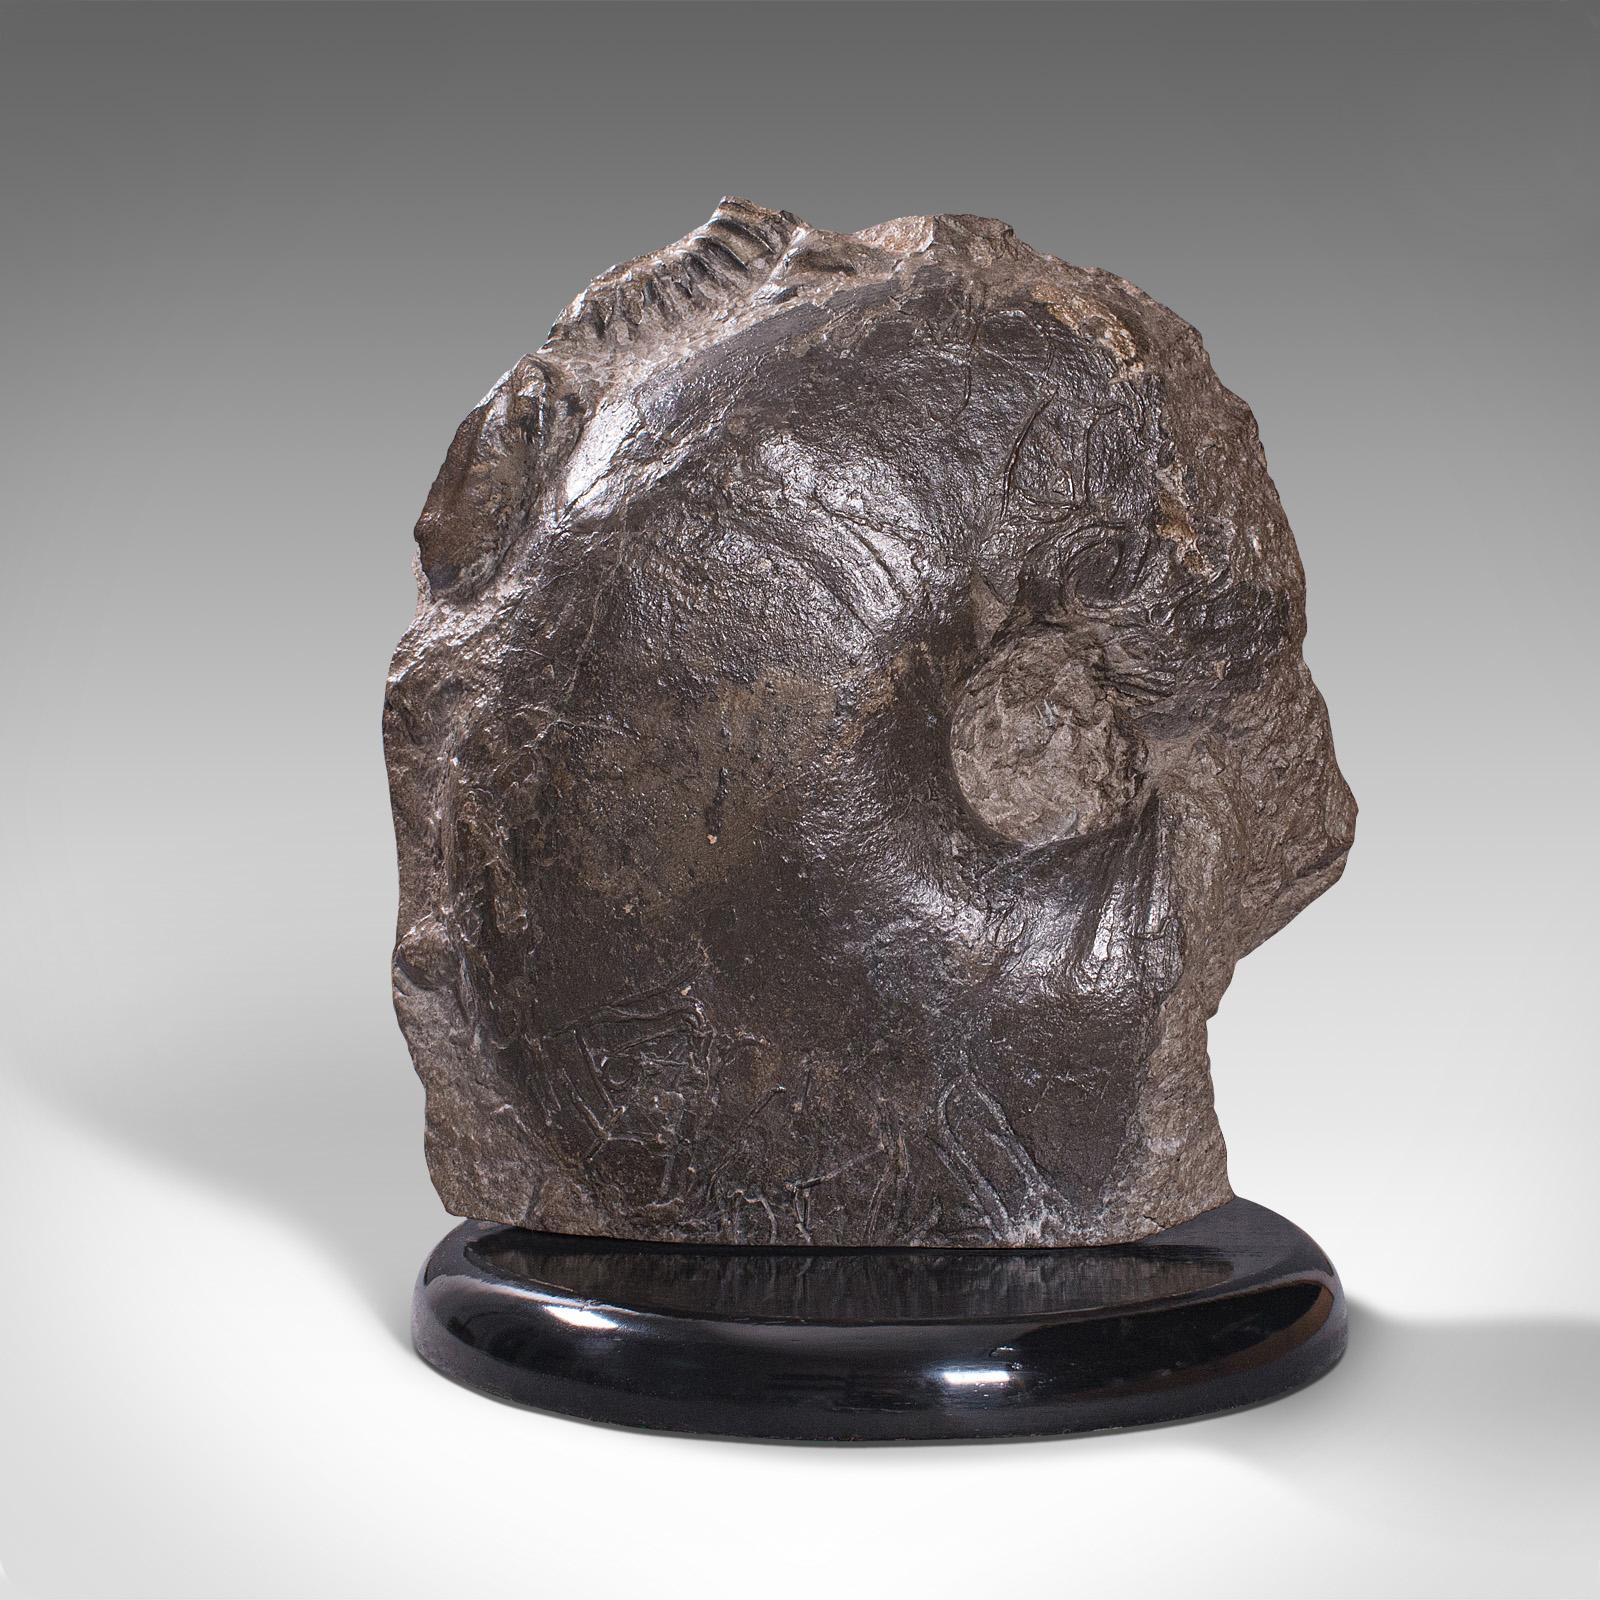 This is a large antique decorative ammonite on plinth. An English, fossilised geological ornamental fossil, dating to the Edwardian period and much, much earlier.

Ammonites evolved in the ocean between 240,000,000 - 65,000,000 years ago and faced